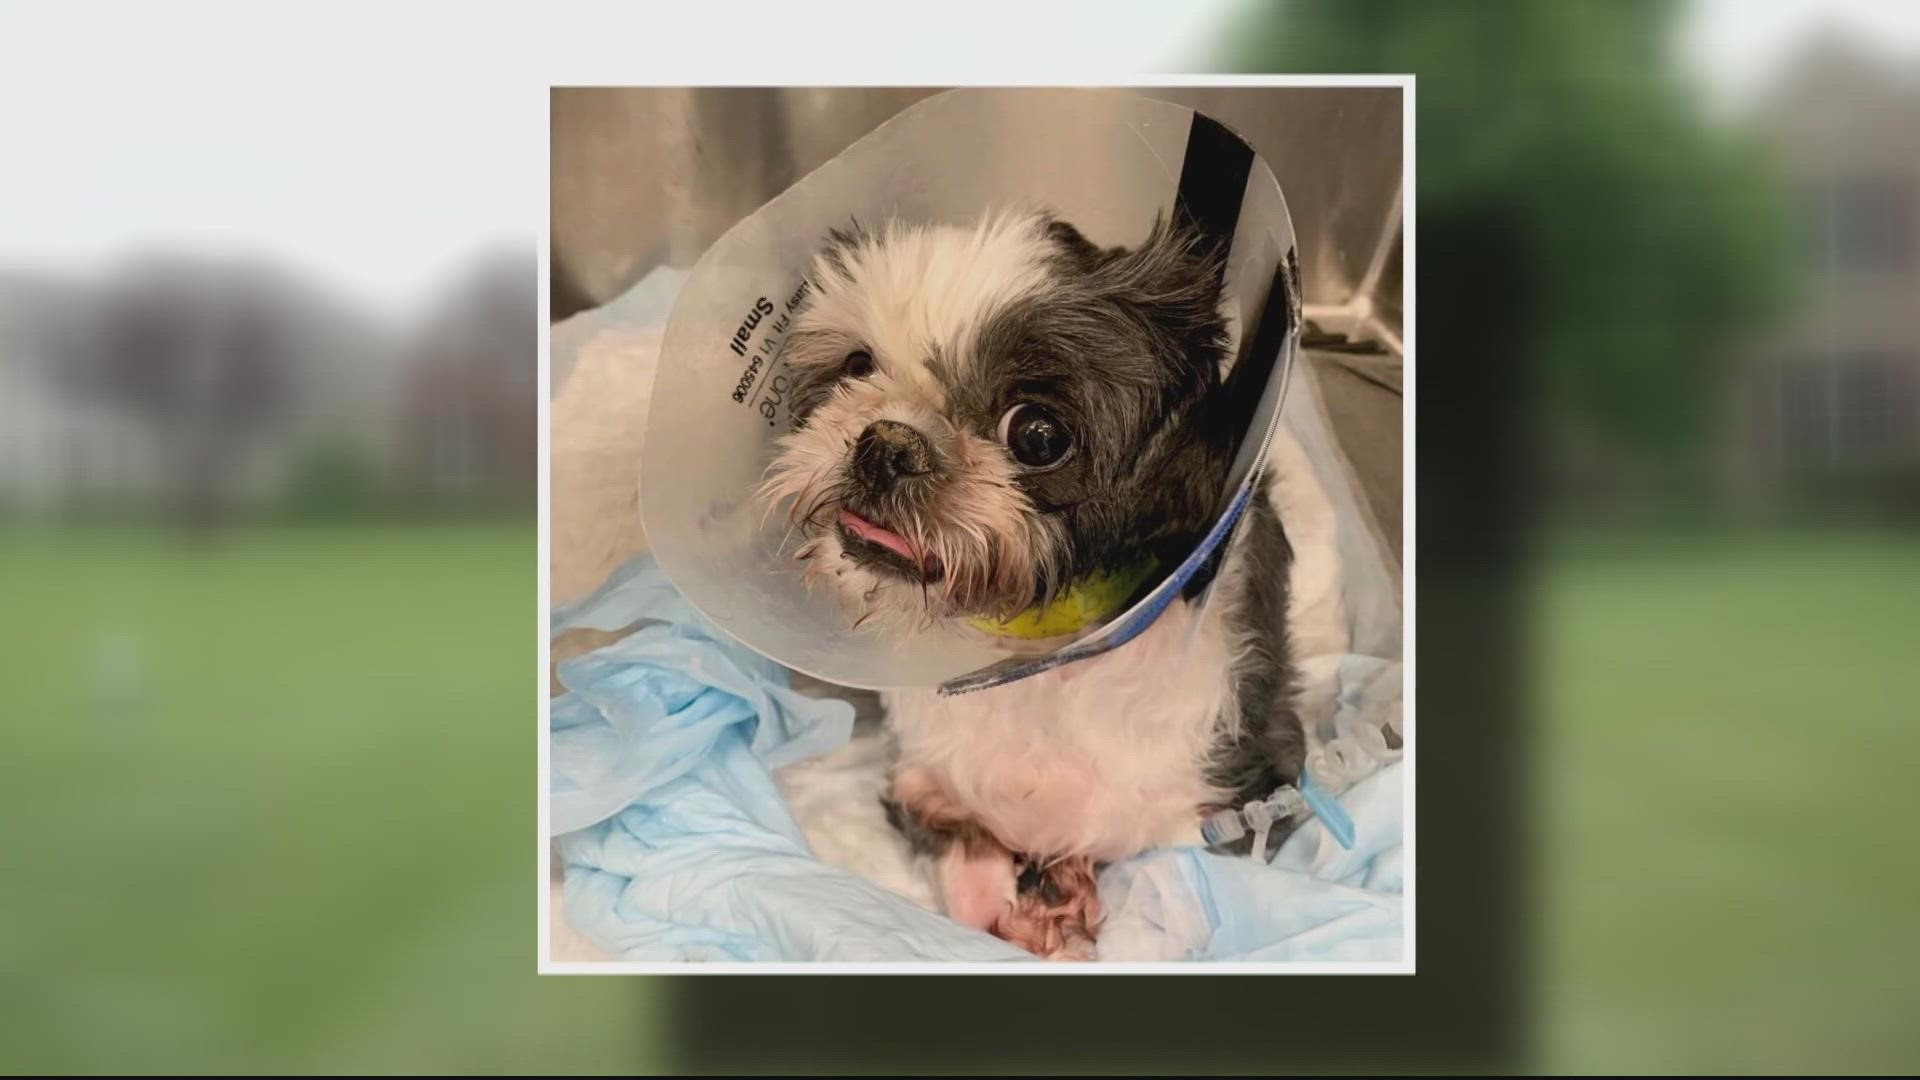 The dog, named Izzy, suffered from a traumatic brain injury, broken femur, broken vertebrae, dislocated tail, and vision loss, among other serious injuries.